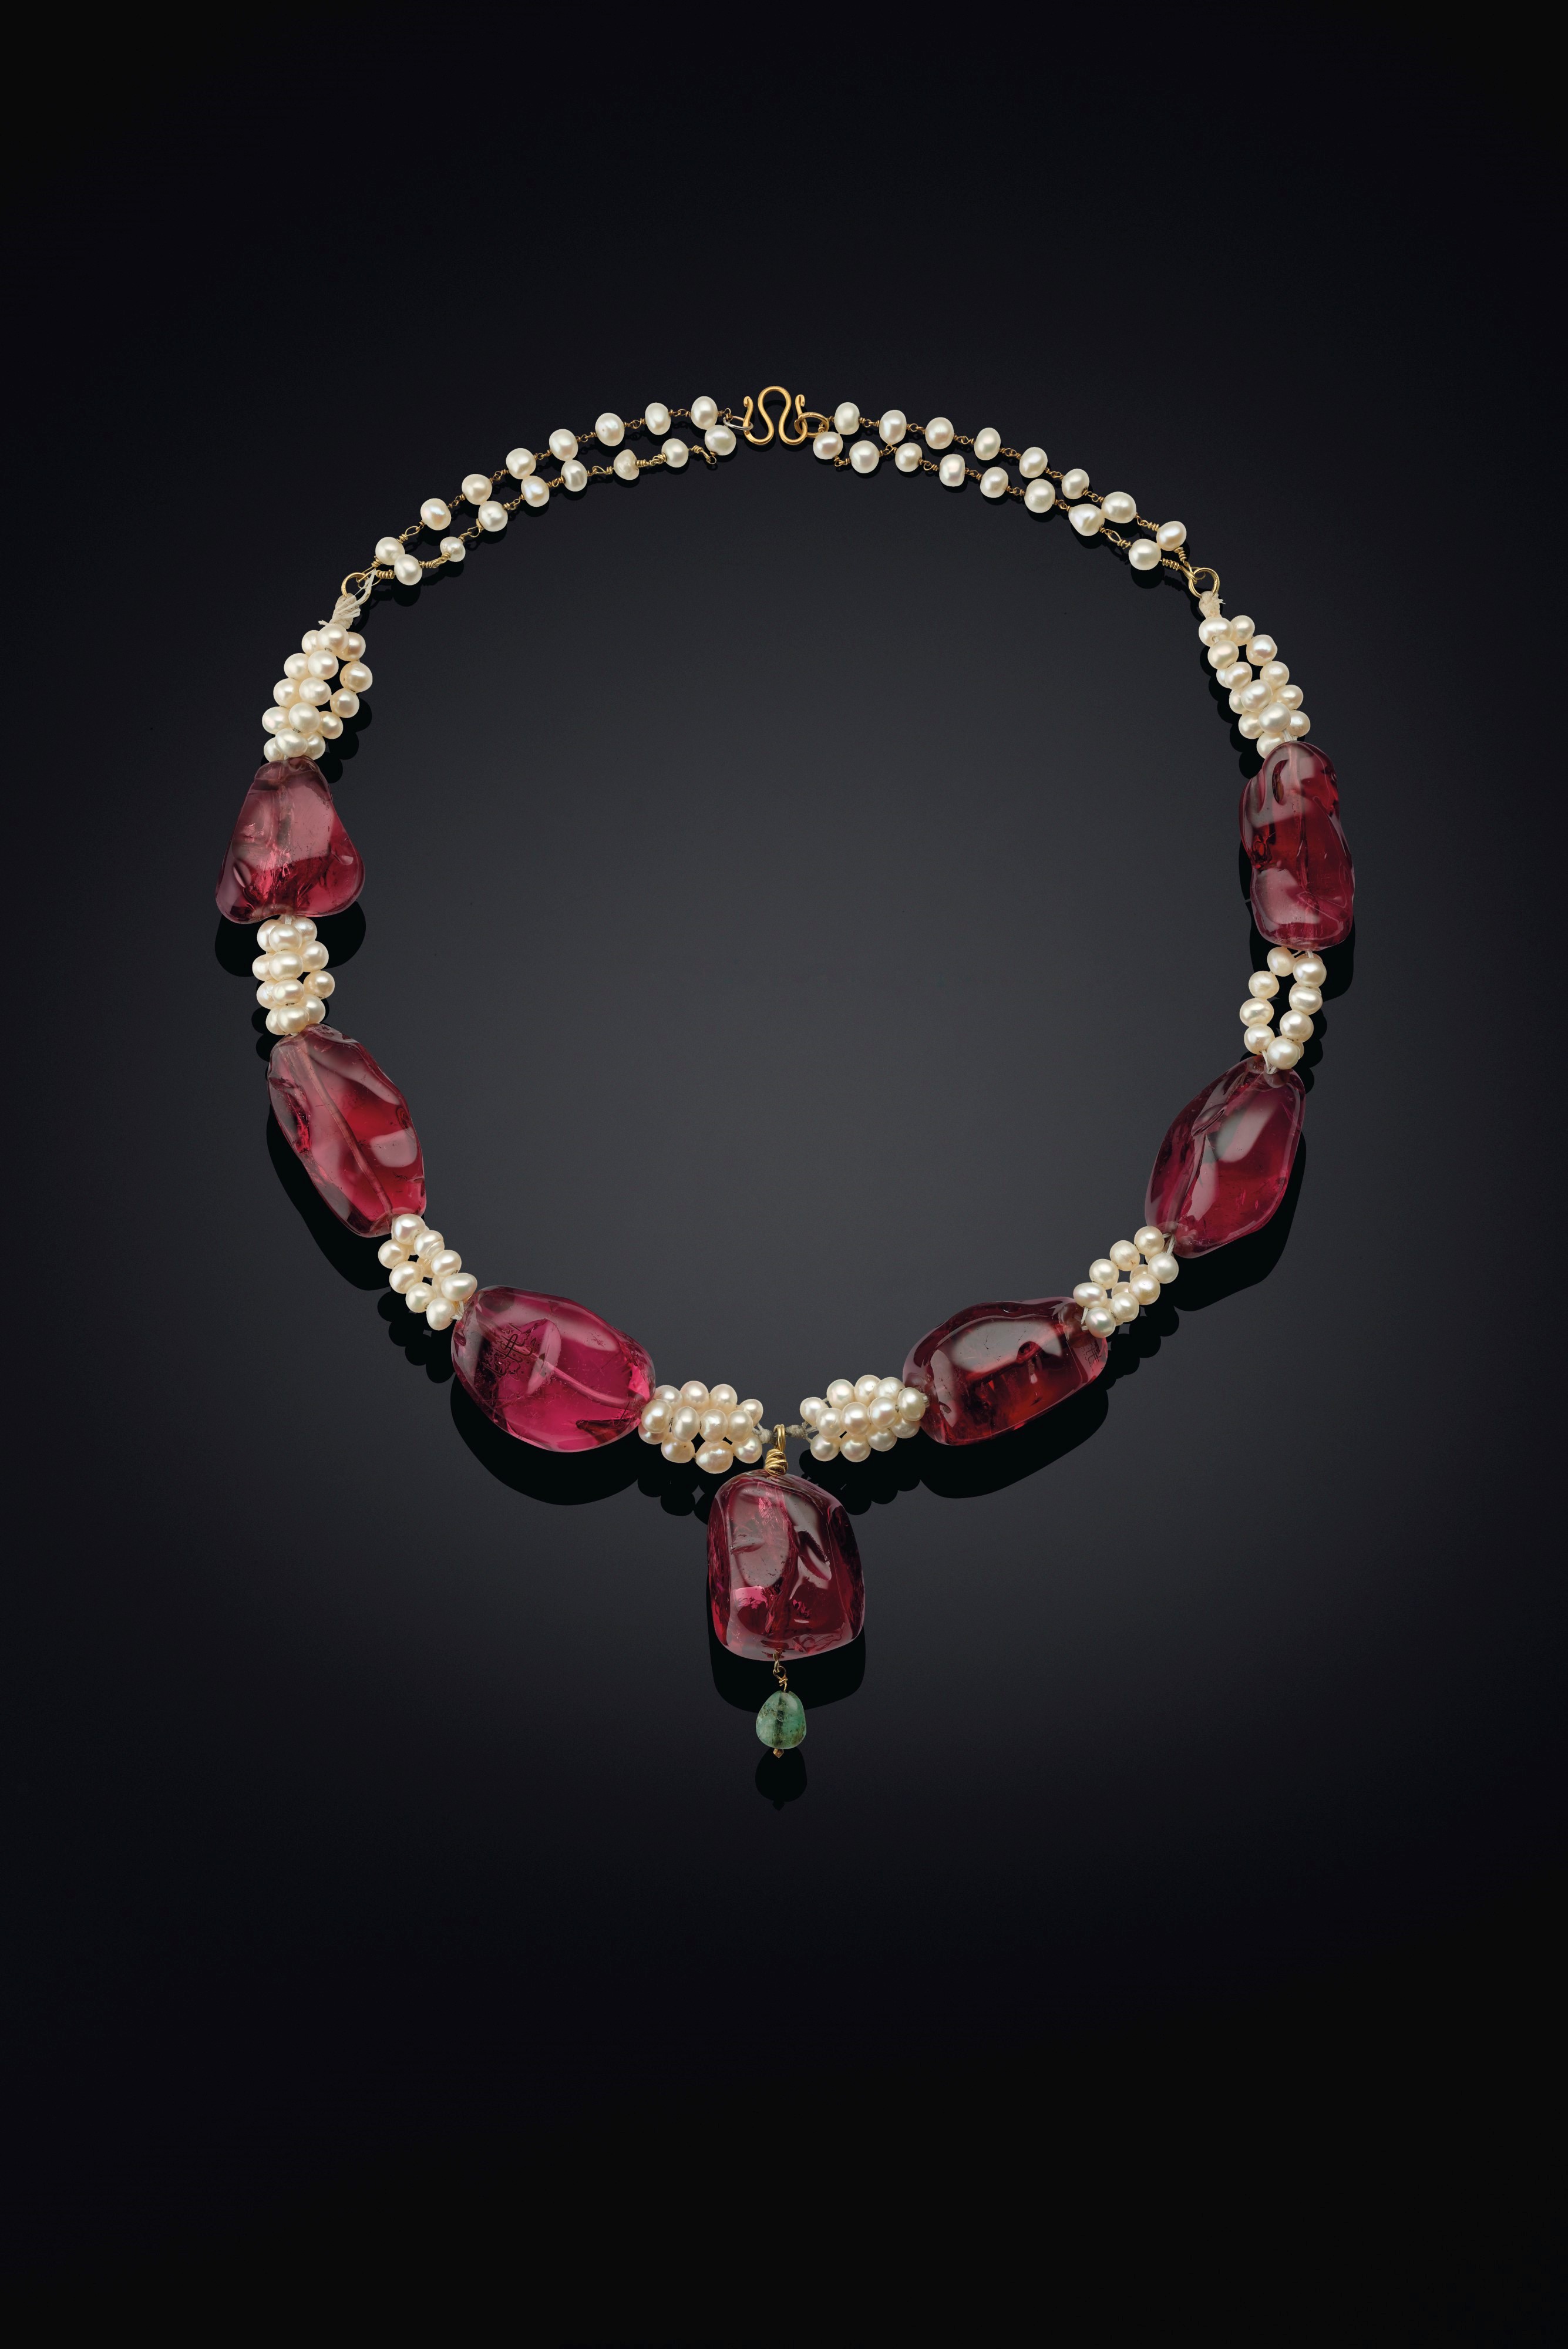 Tumbled spinel necklace recently sold by Christie’s at their auction. Image credit: Christie's